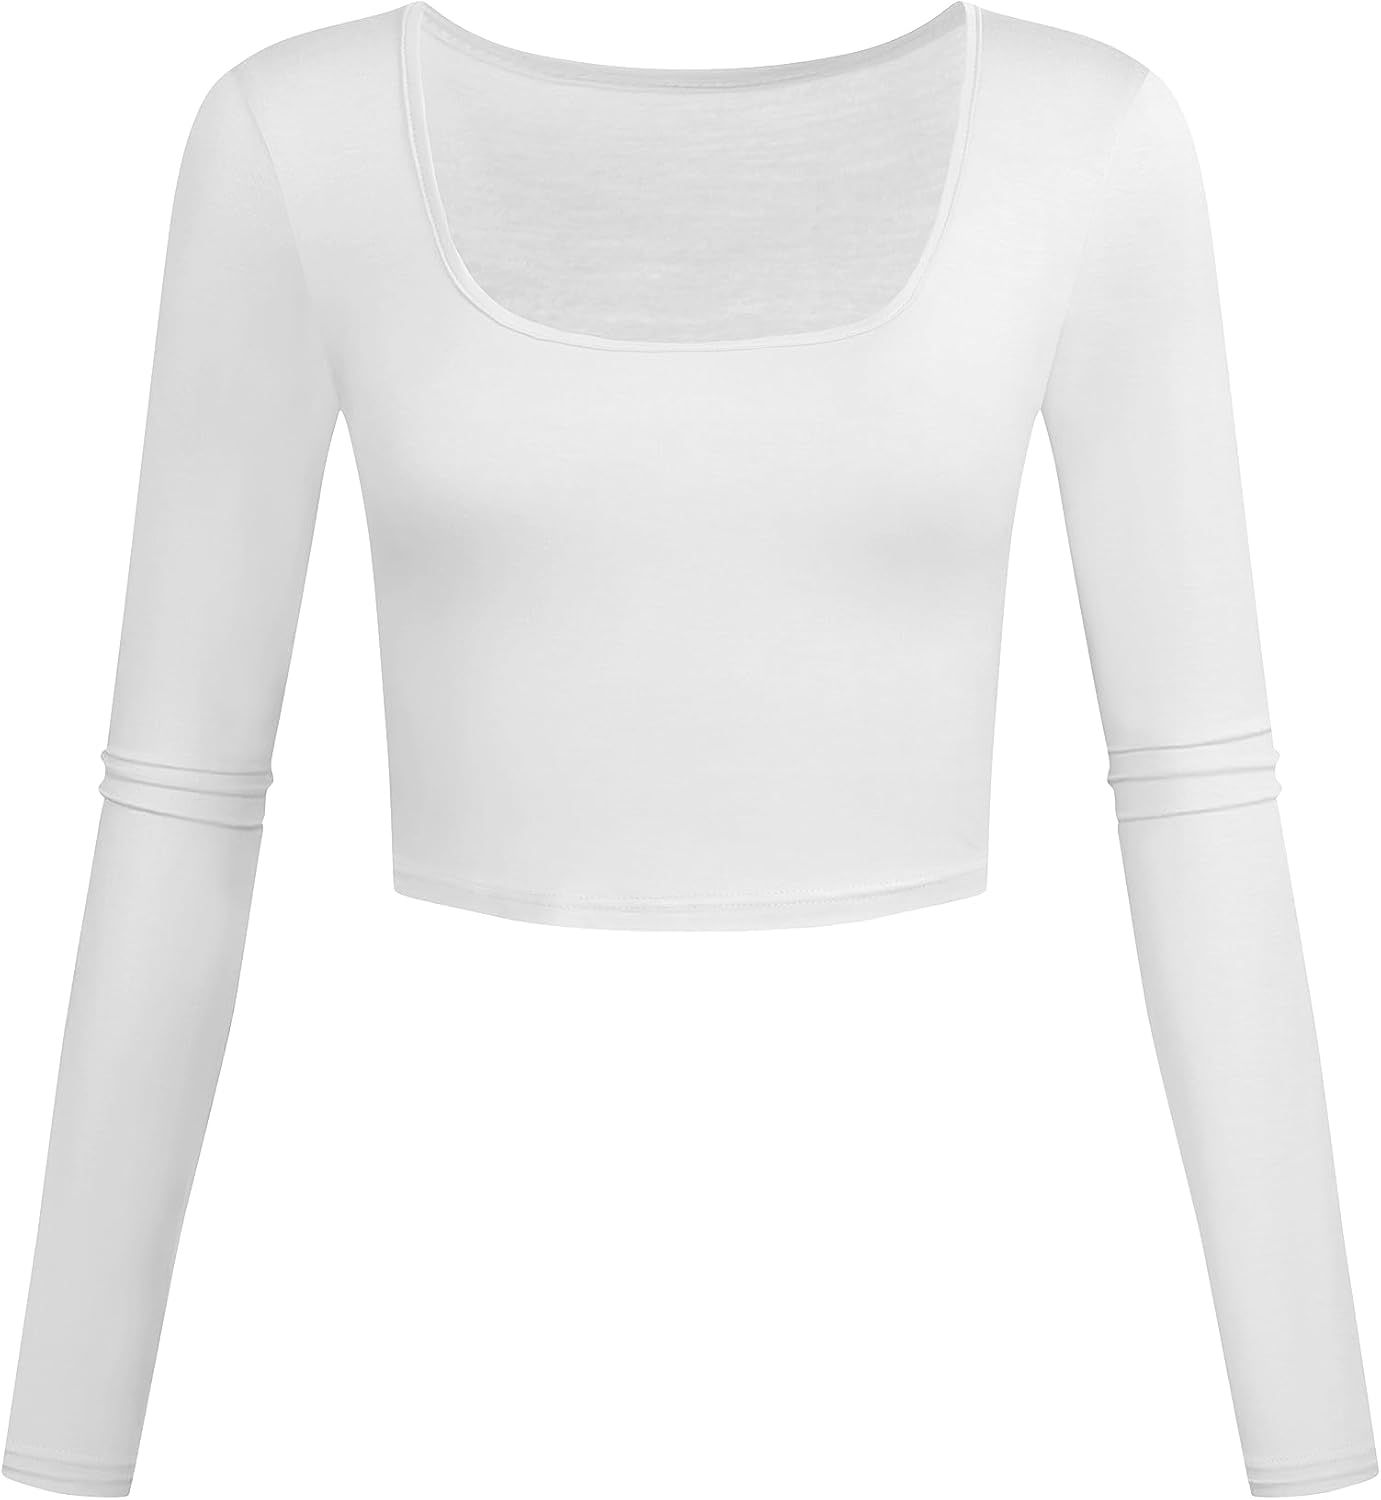 Lightweight Square Neck Crop Tops Long Sleeve Slim Fit Basic Workout Shirts for Women | Amazon (US)